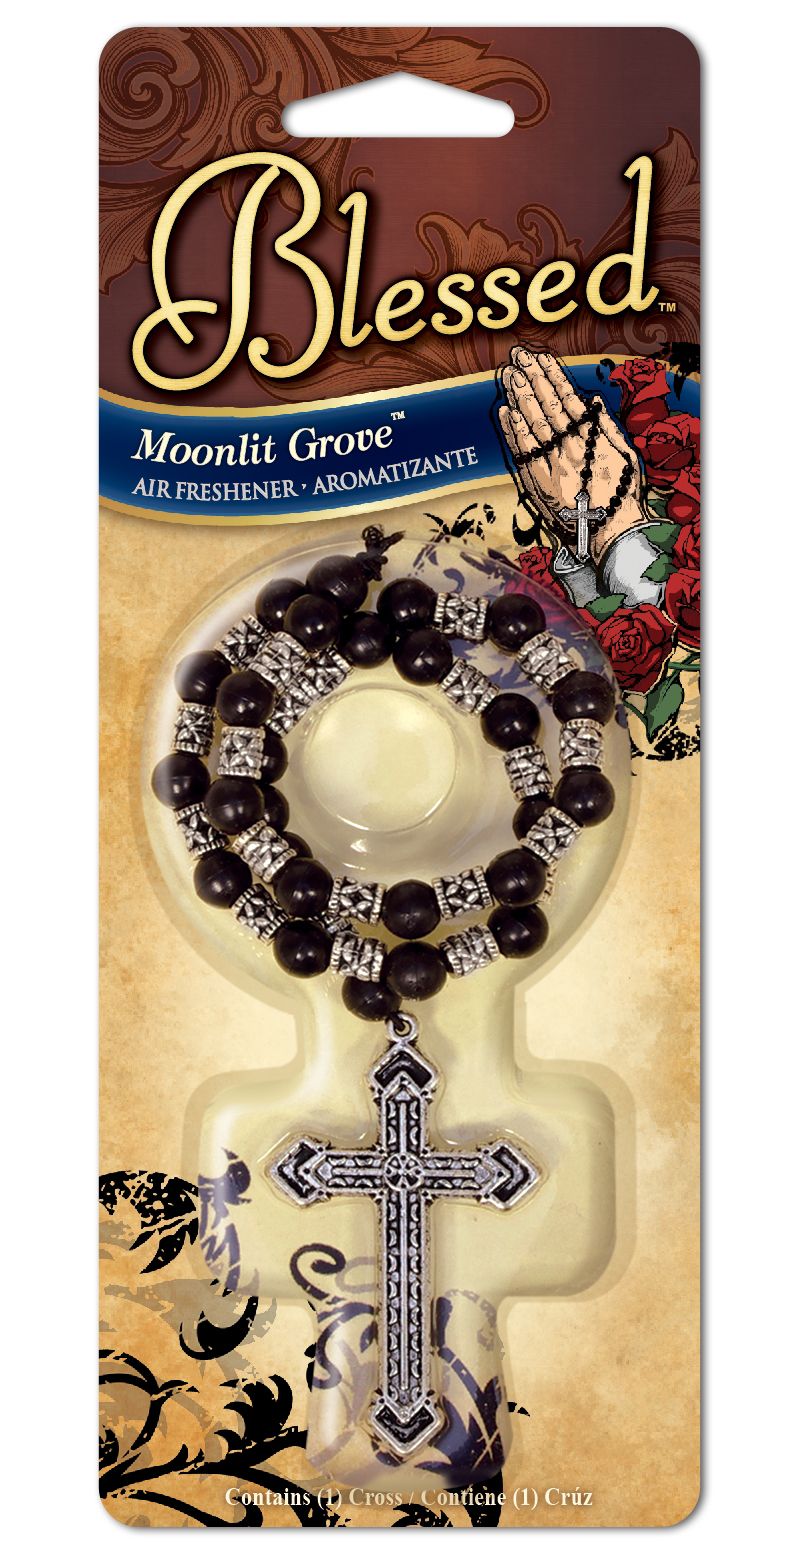 Blessed Scented Metal Cross Hanging Air Freshener